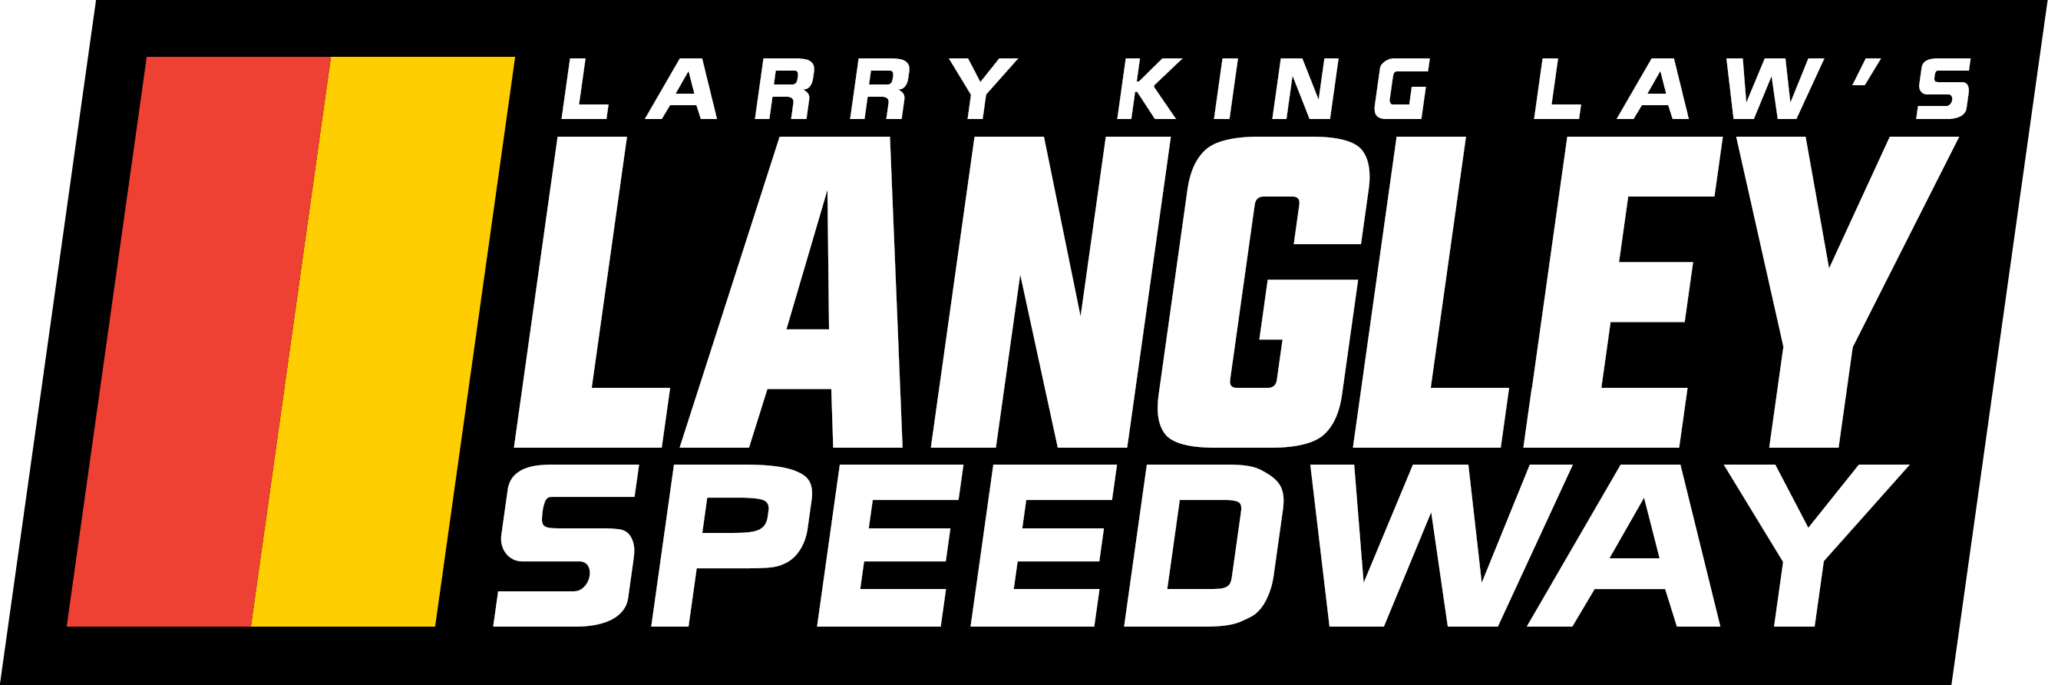 Larry King Law's Langley Speedway logo